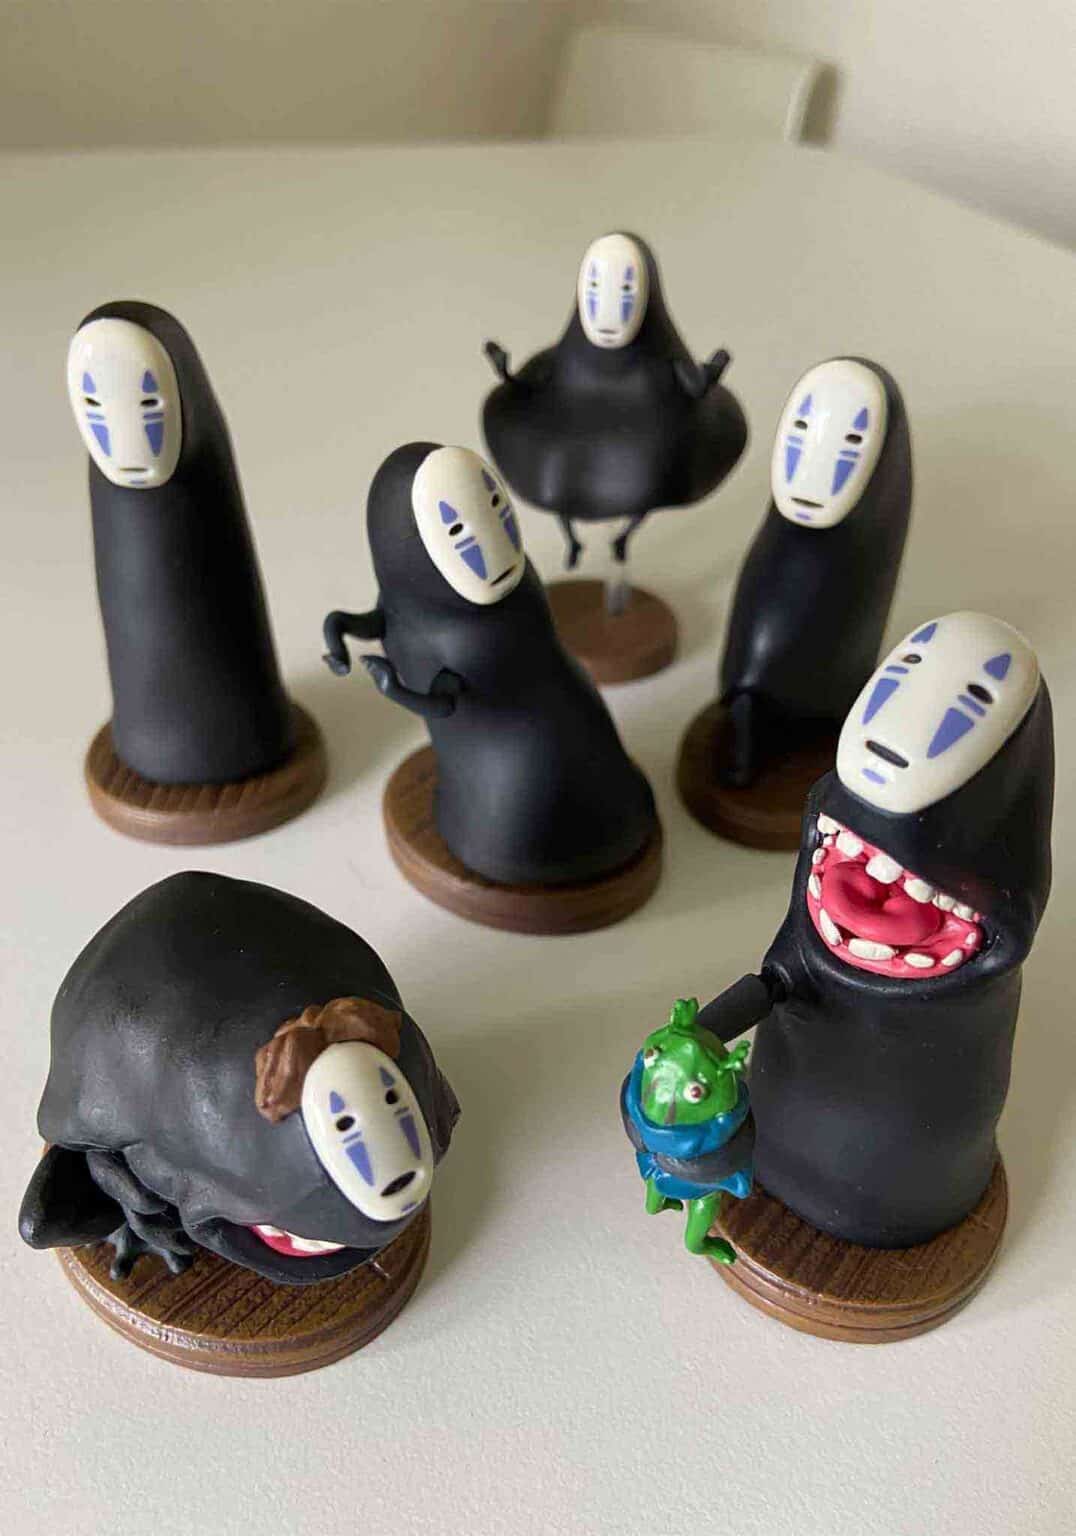 Clever Idiots Spirited Away No Face 3" Figure Surprise Box Kawaii Gifts 4990593328628